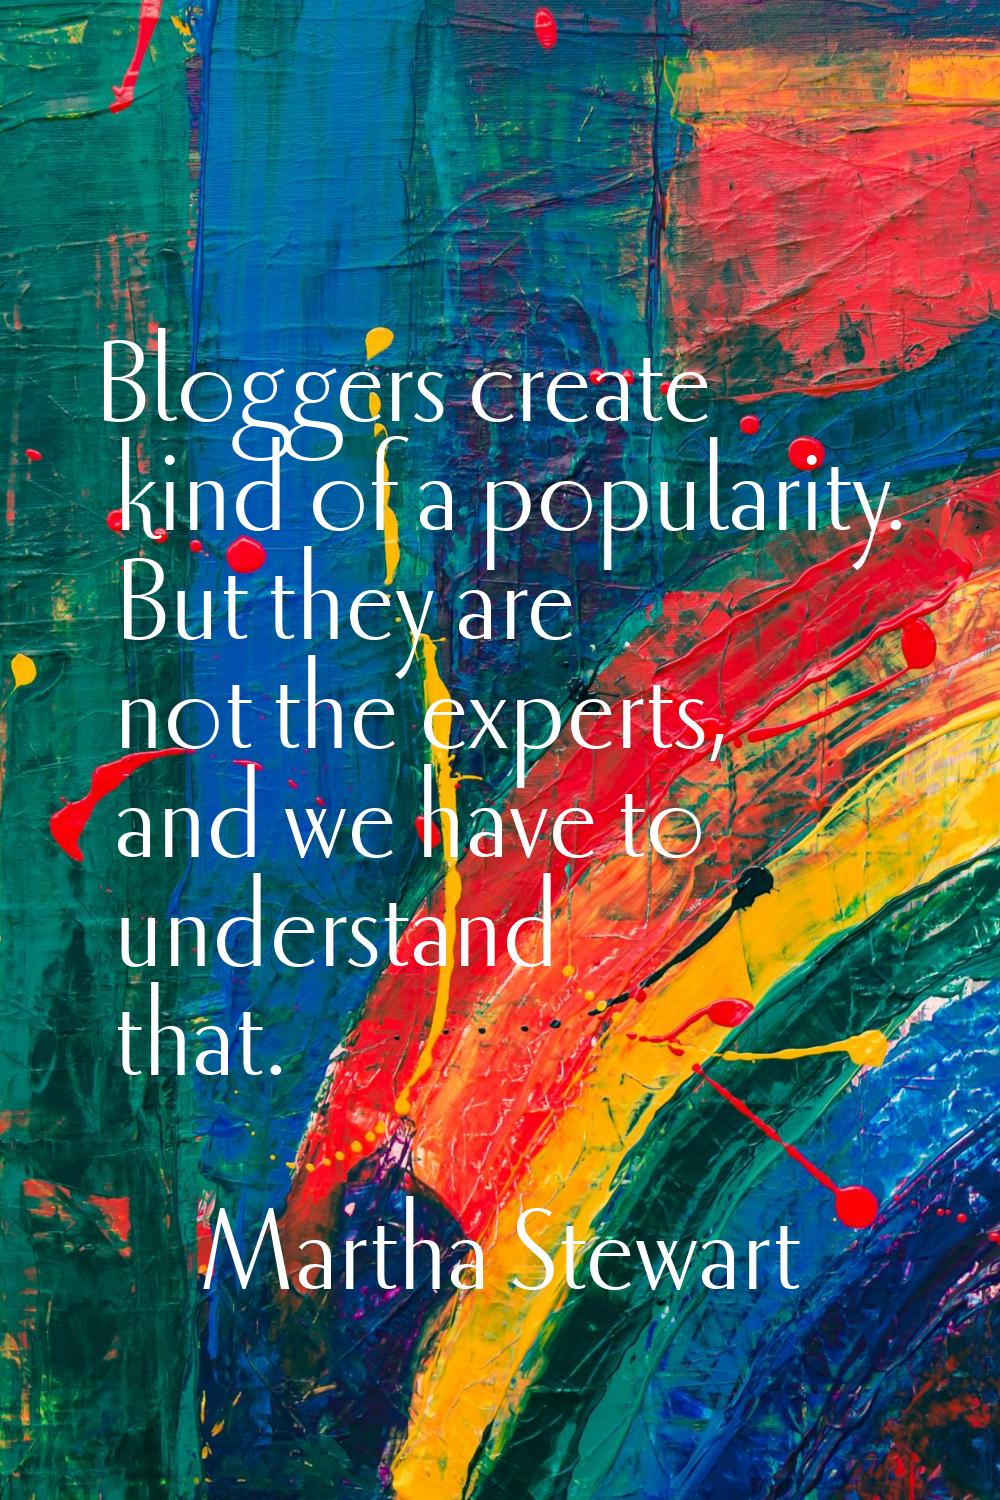 Bloggers create kind of a popularity. But they are not the experts, and we have to understand that.